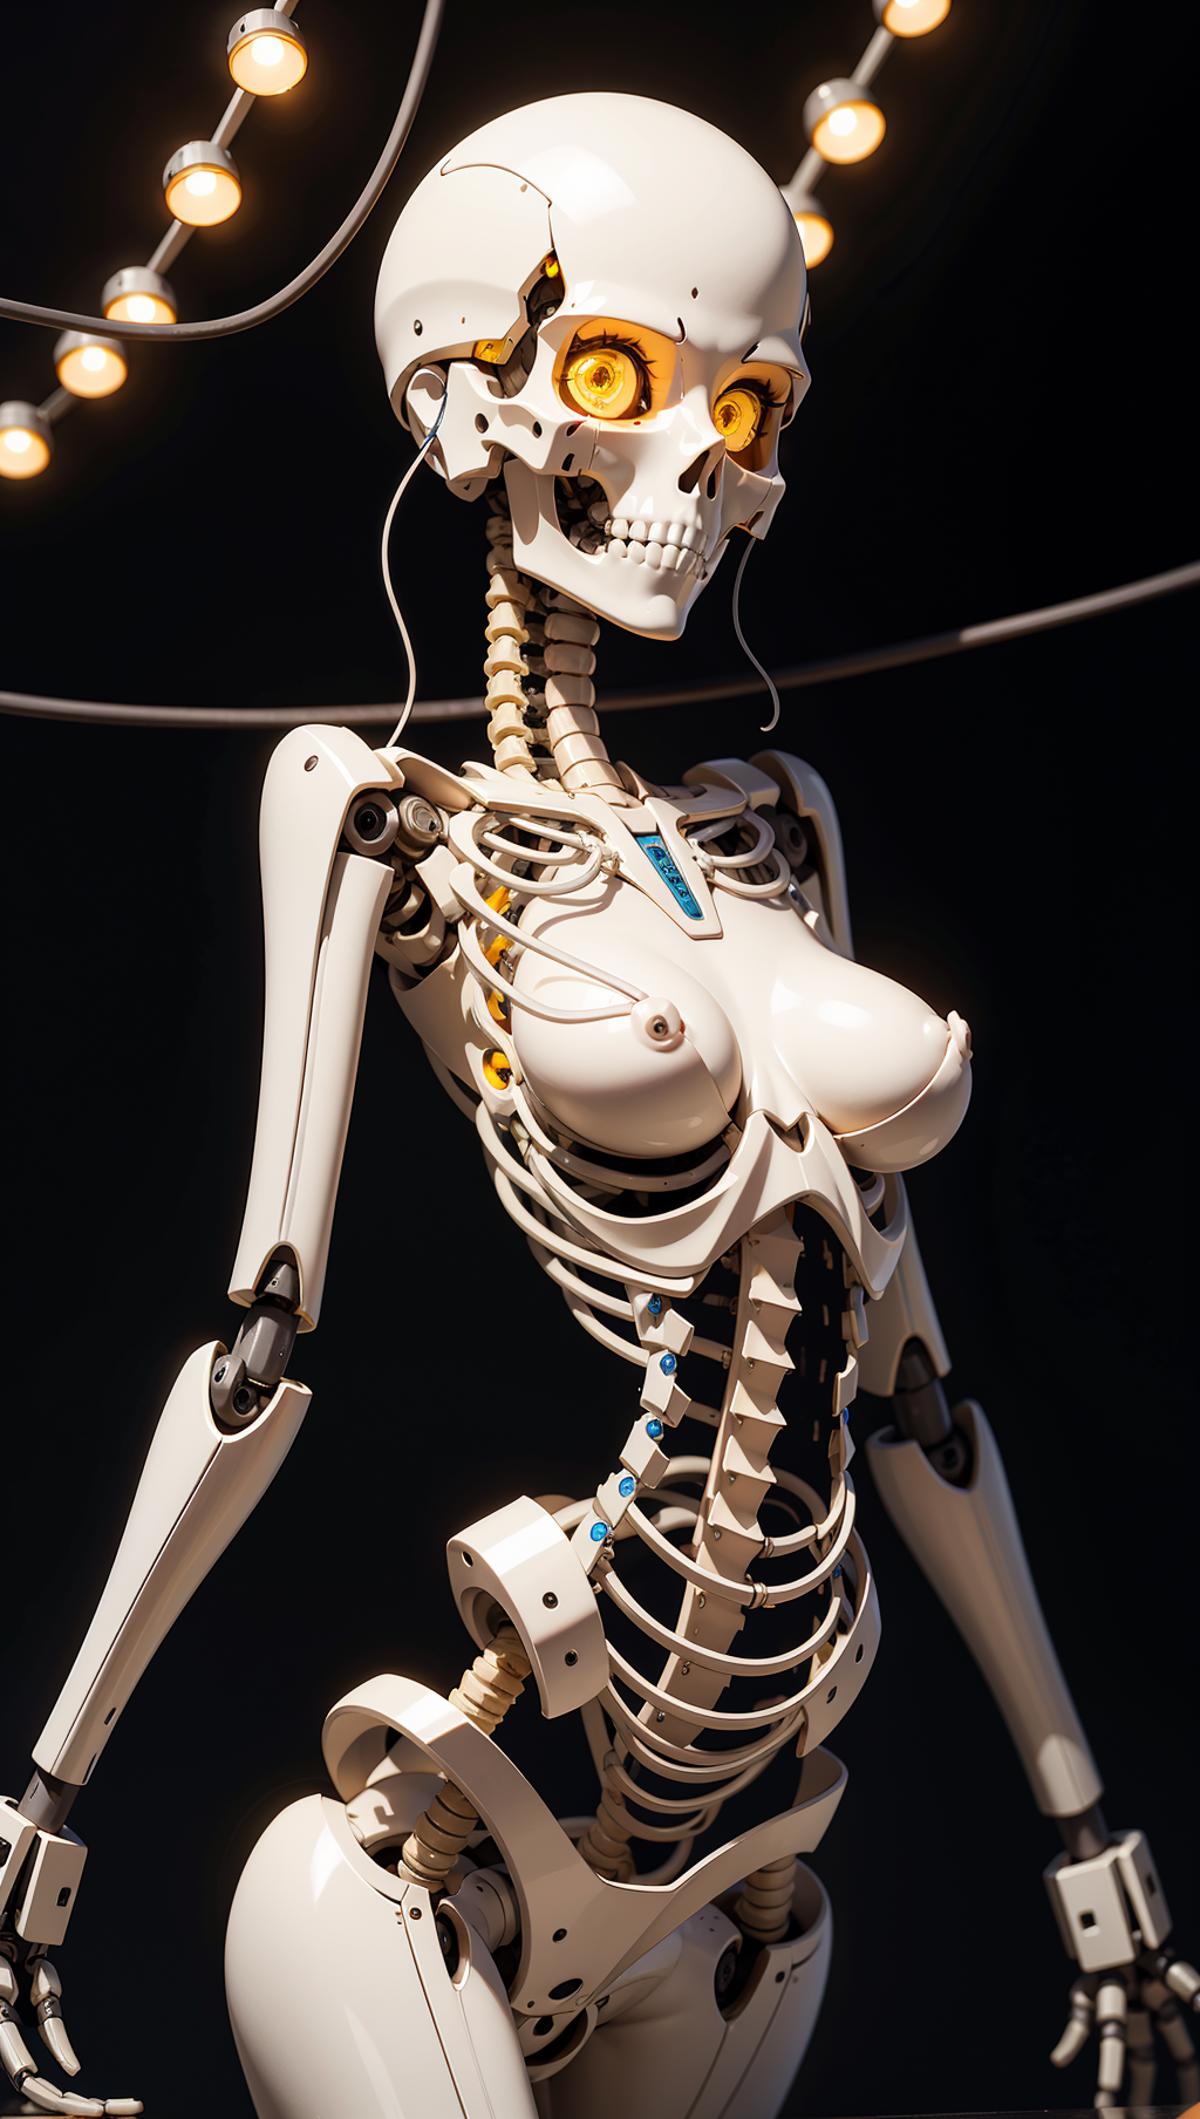 A Skeleton Robot Model with a Female Body and Large Breasts.